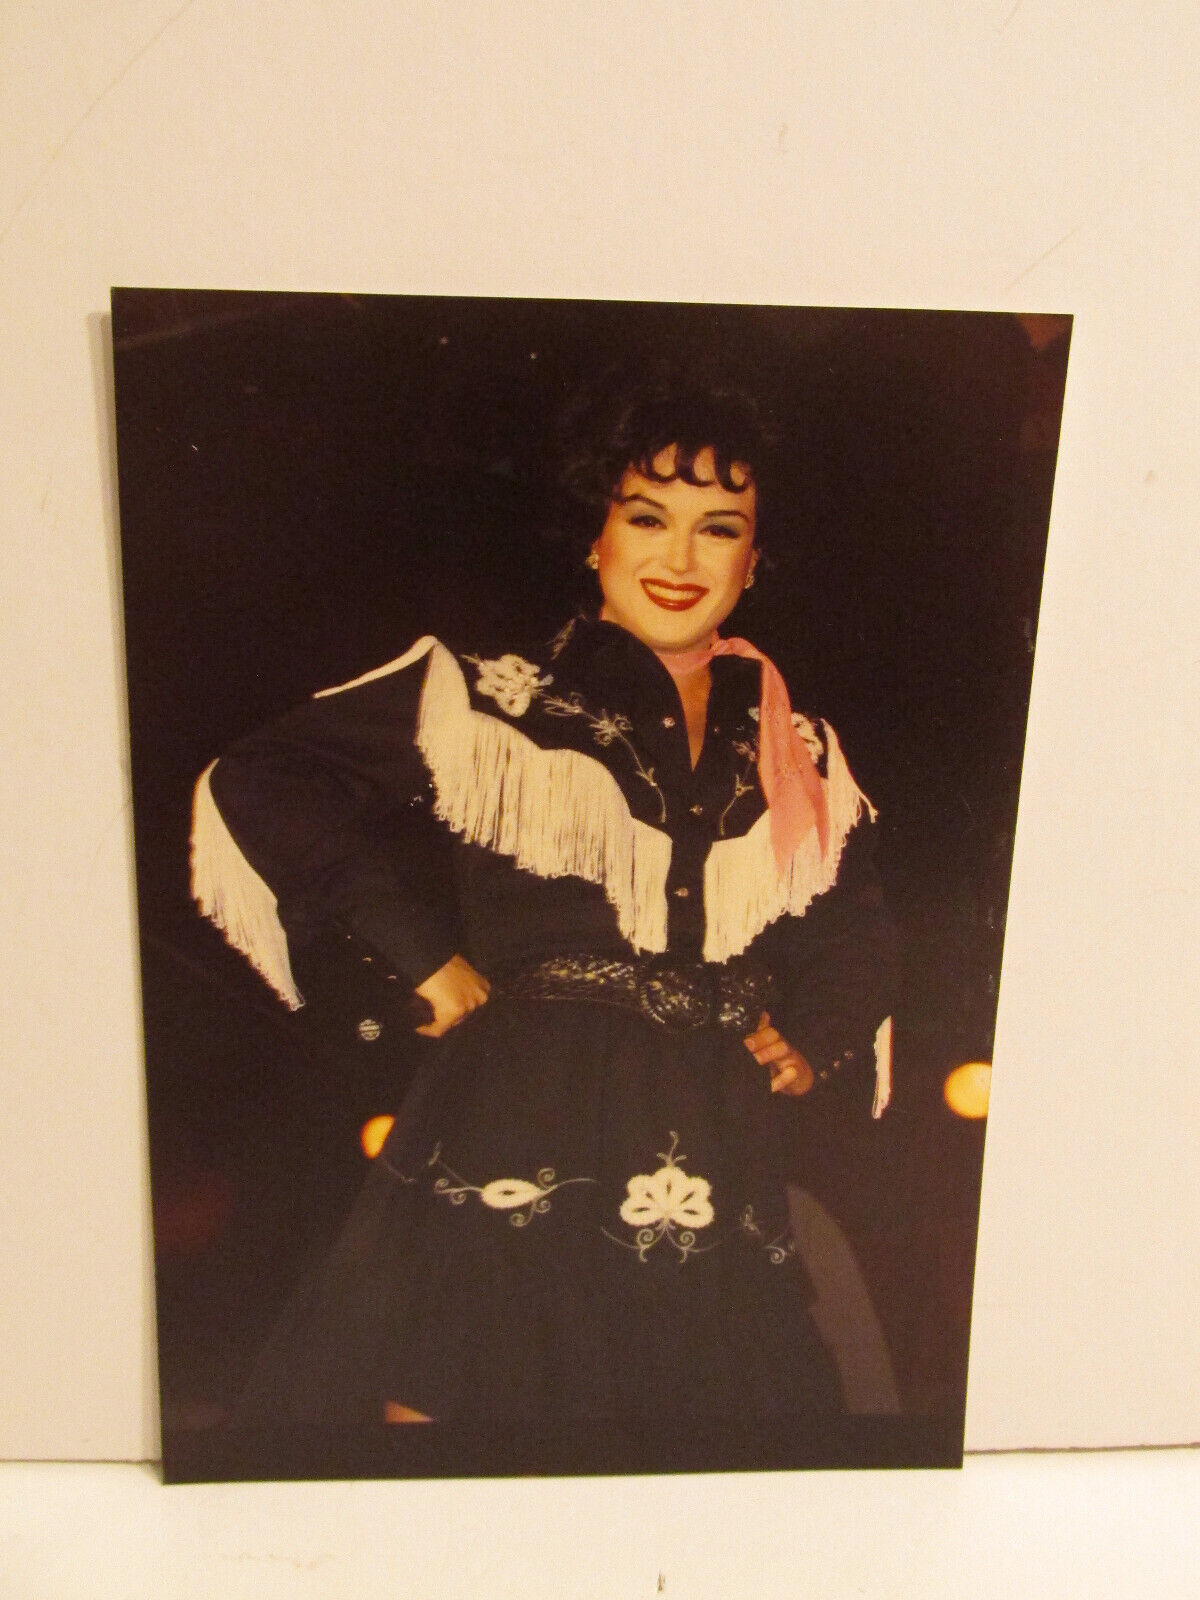 VINTAGE FOUND PHOTOGRAPH COLOR ART OLD PHOTO PATSY CLINE COVER SINGER ACTRESS